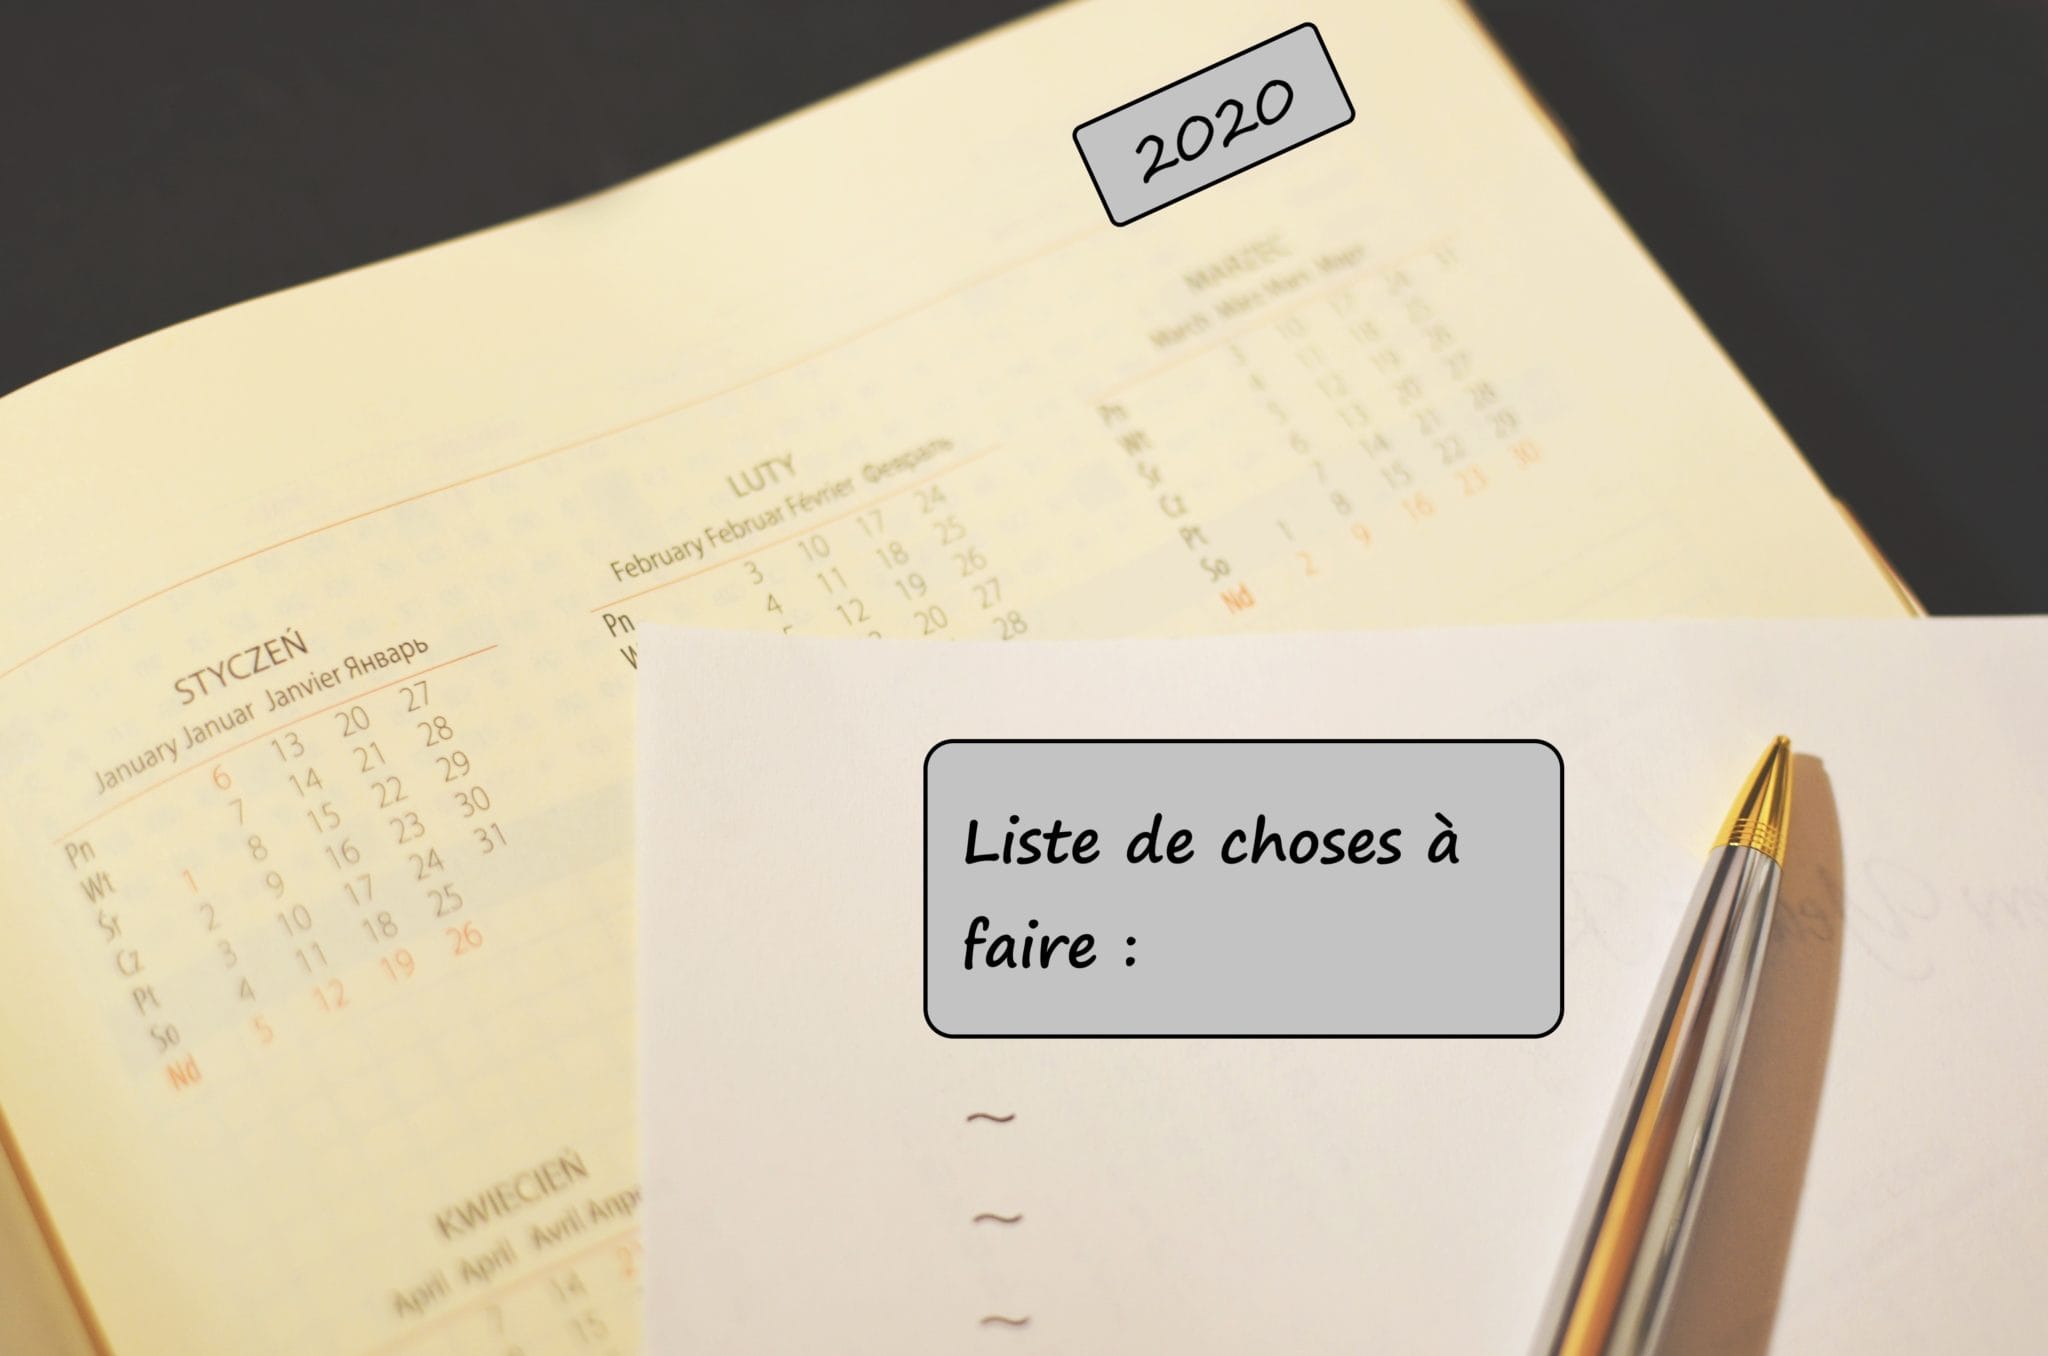 A 2020 calendar and a to-do list in french titled "liste de choses à faire," with a pencil on top, all placed on a dark background.